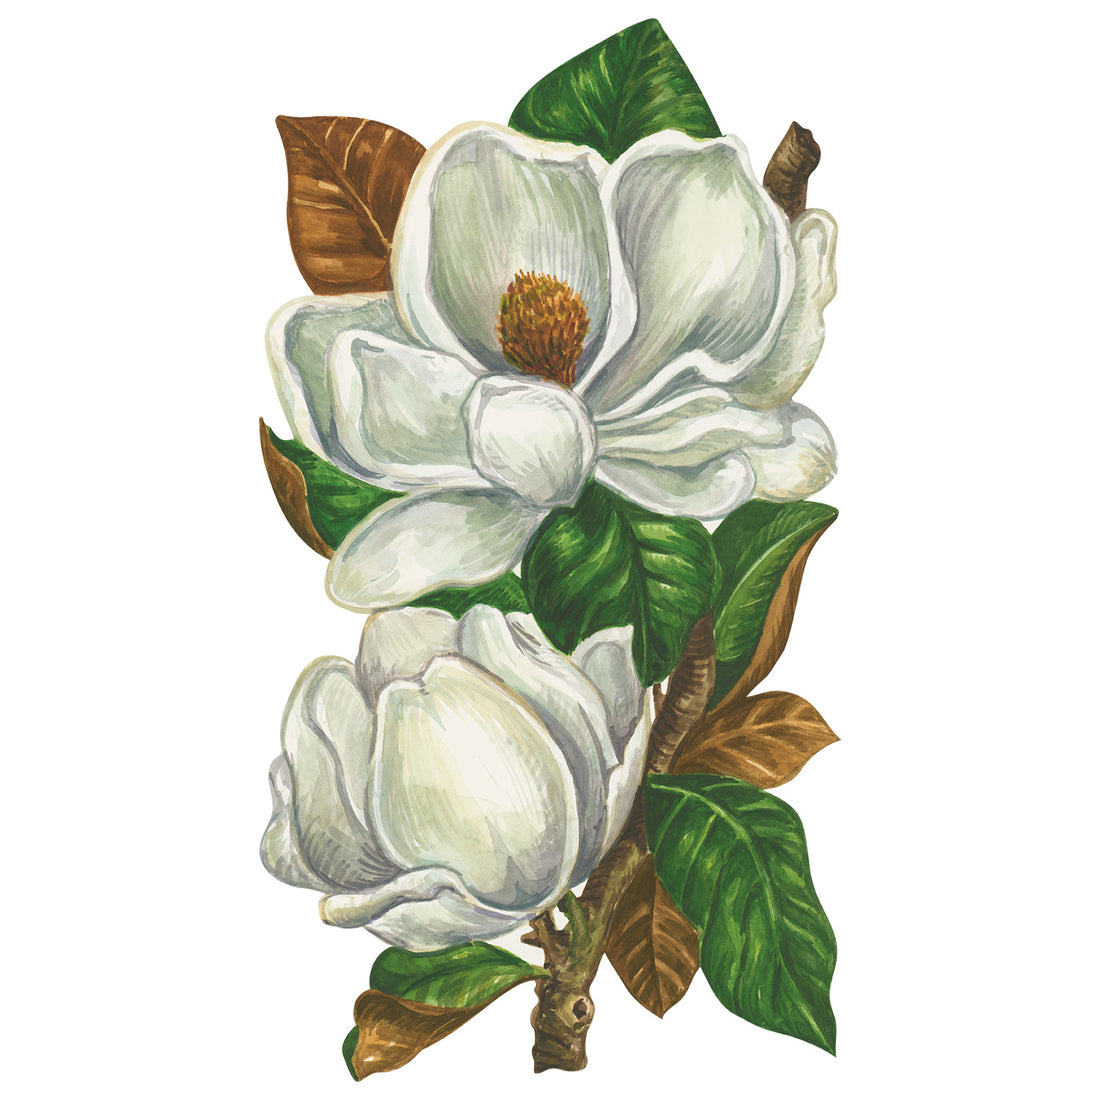 A die-cut illustration of two large white magnolia blossoms with deep green and brown leaves on a stem.